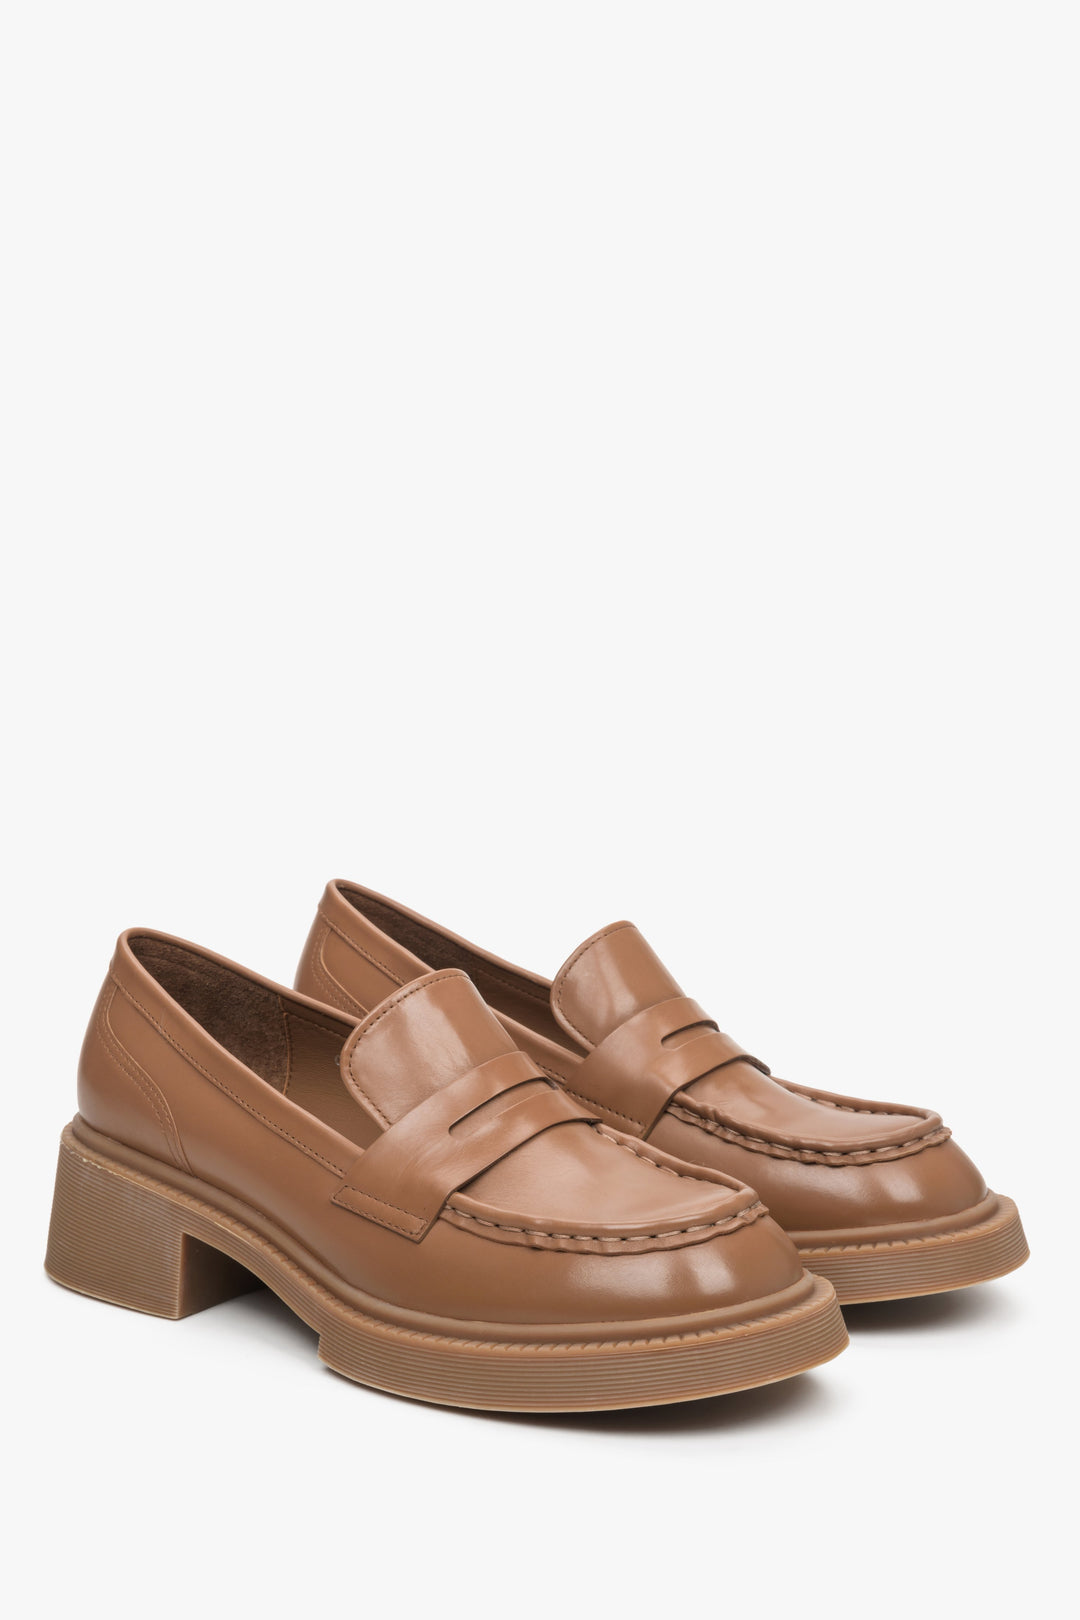 Women's brown leather moccasins with a stable heel, Estro.